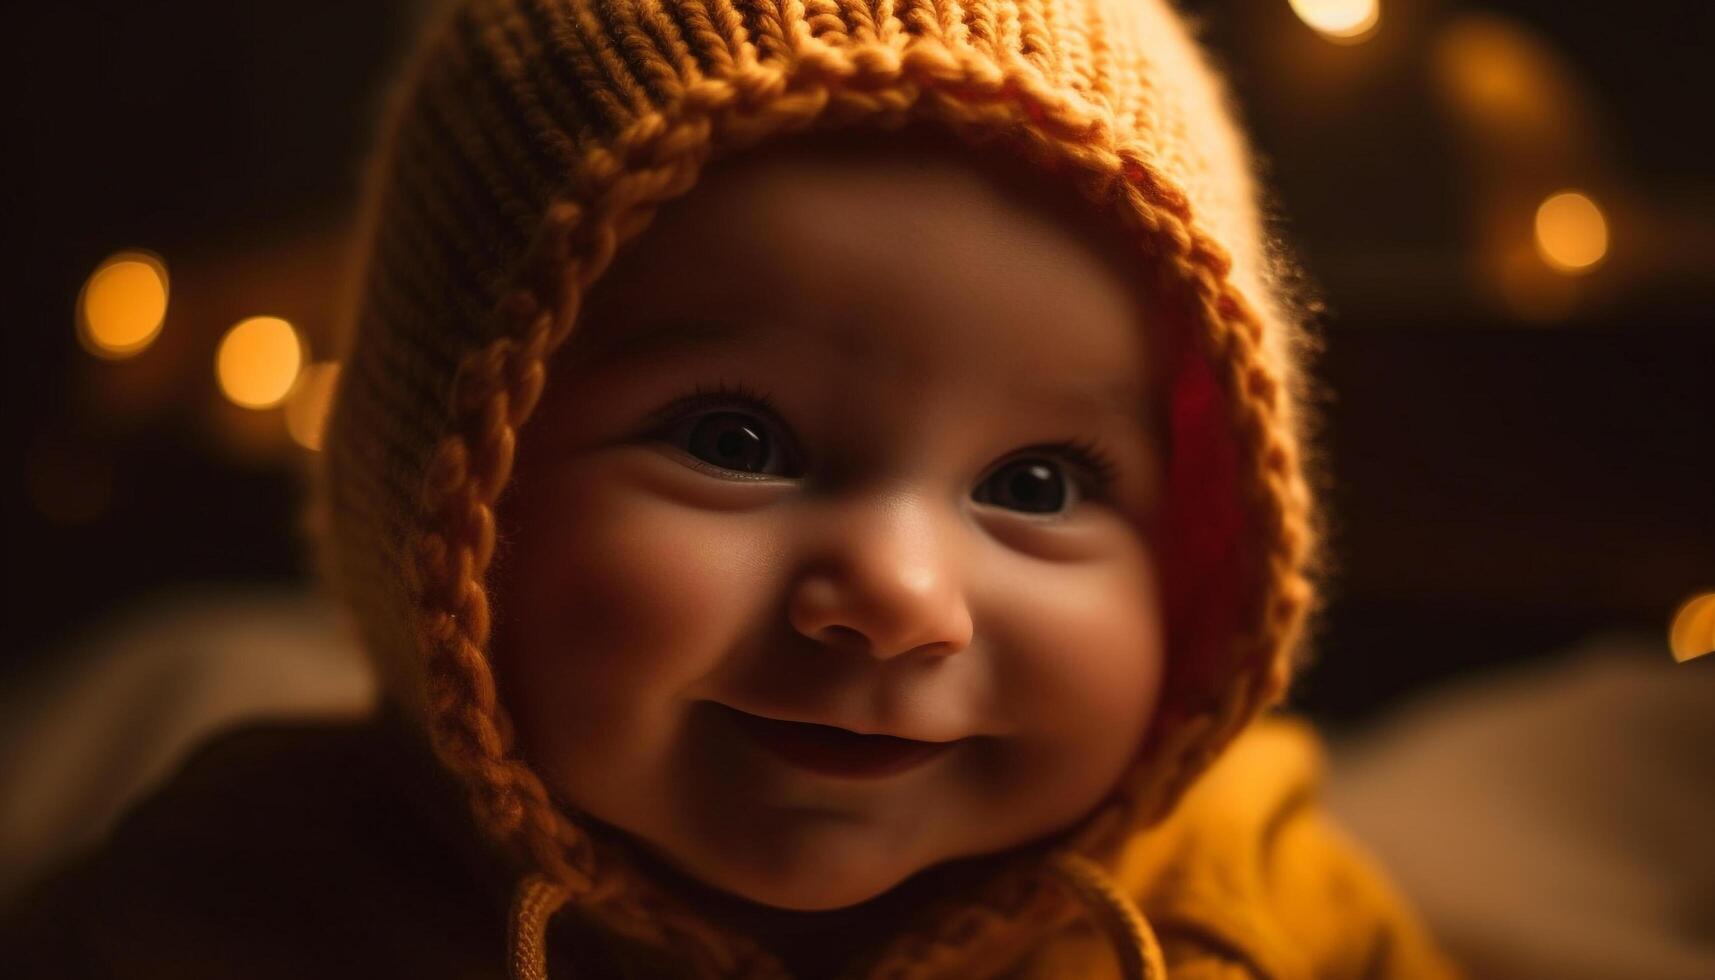 Smiling baby girl warm enjoys autumn nature outdoors generated by AI Stock Photo at Vecteezy